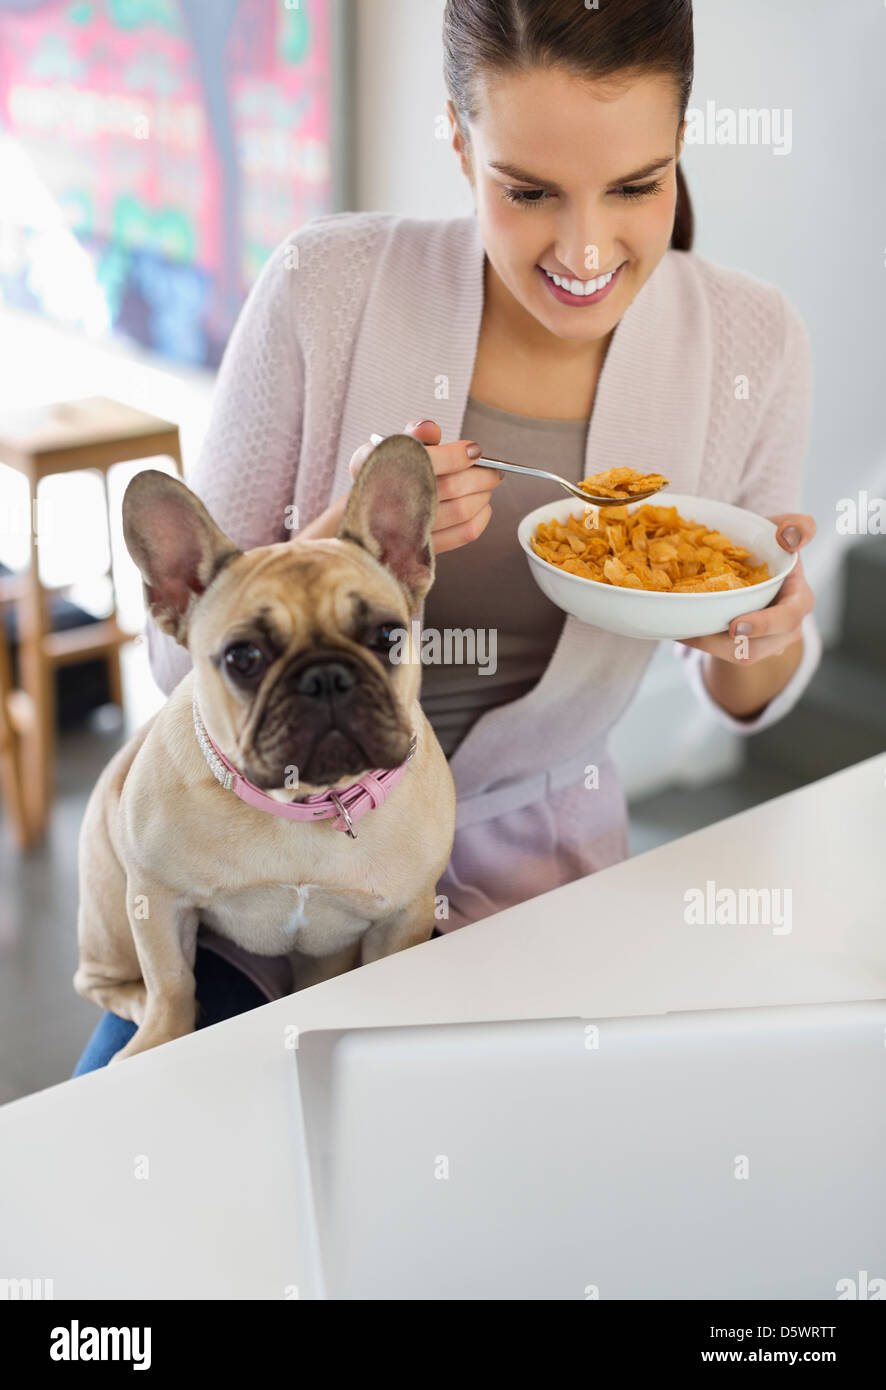 Woman eating cereal with dog on tour Banque D'Images